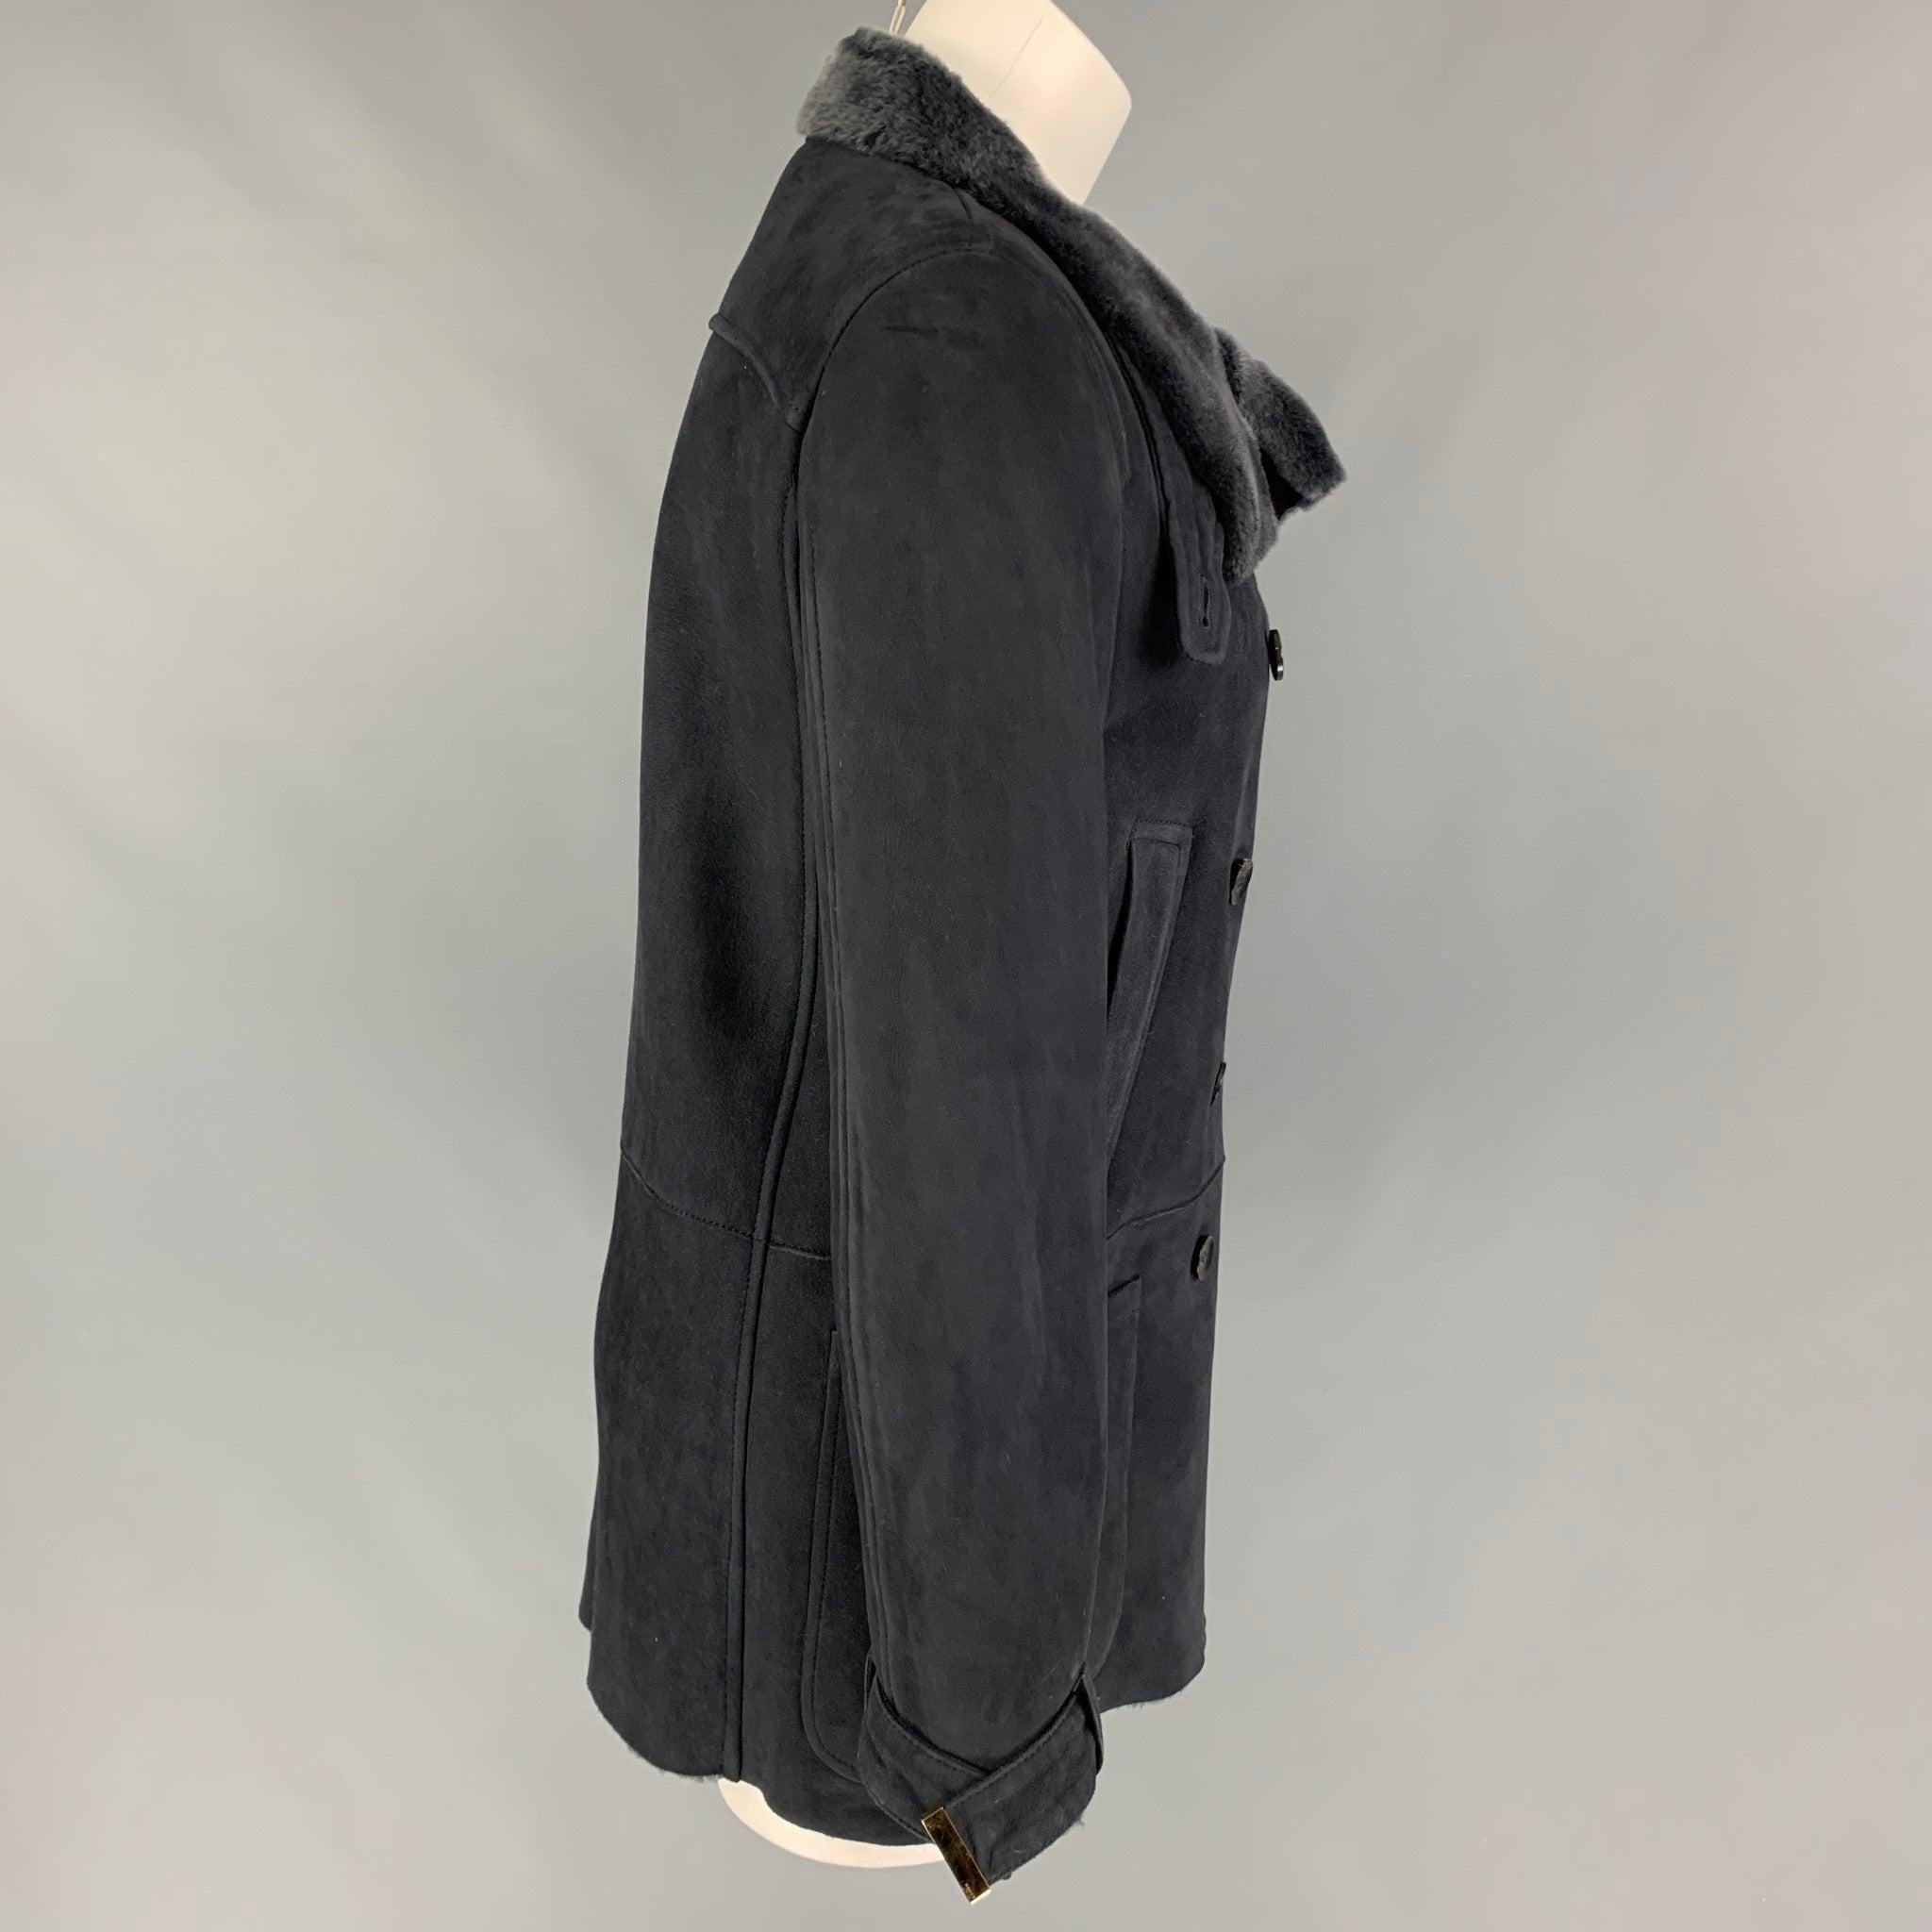 GUCCI by Tom Ford coat comes in a grey shearling with a fur interior featuring front pockets, gold tone hardware, strap cuffs, and a double breasted closure. Made in Italy.
Excellent
Pre-Owned Condition. 

Marked:  42 

Measurements: 
 
Shoulder: